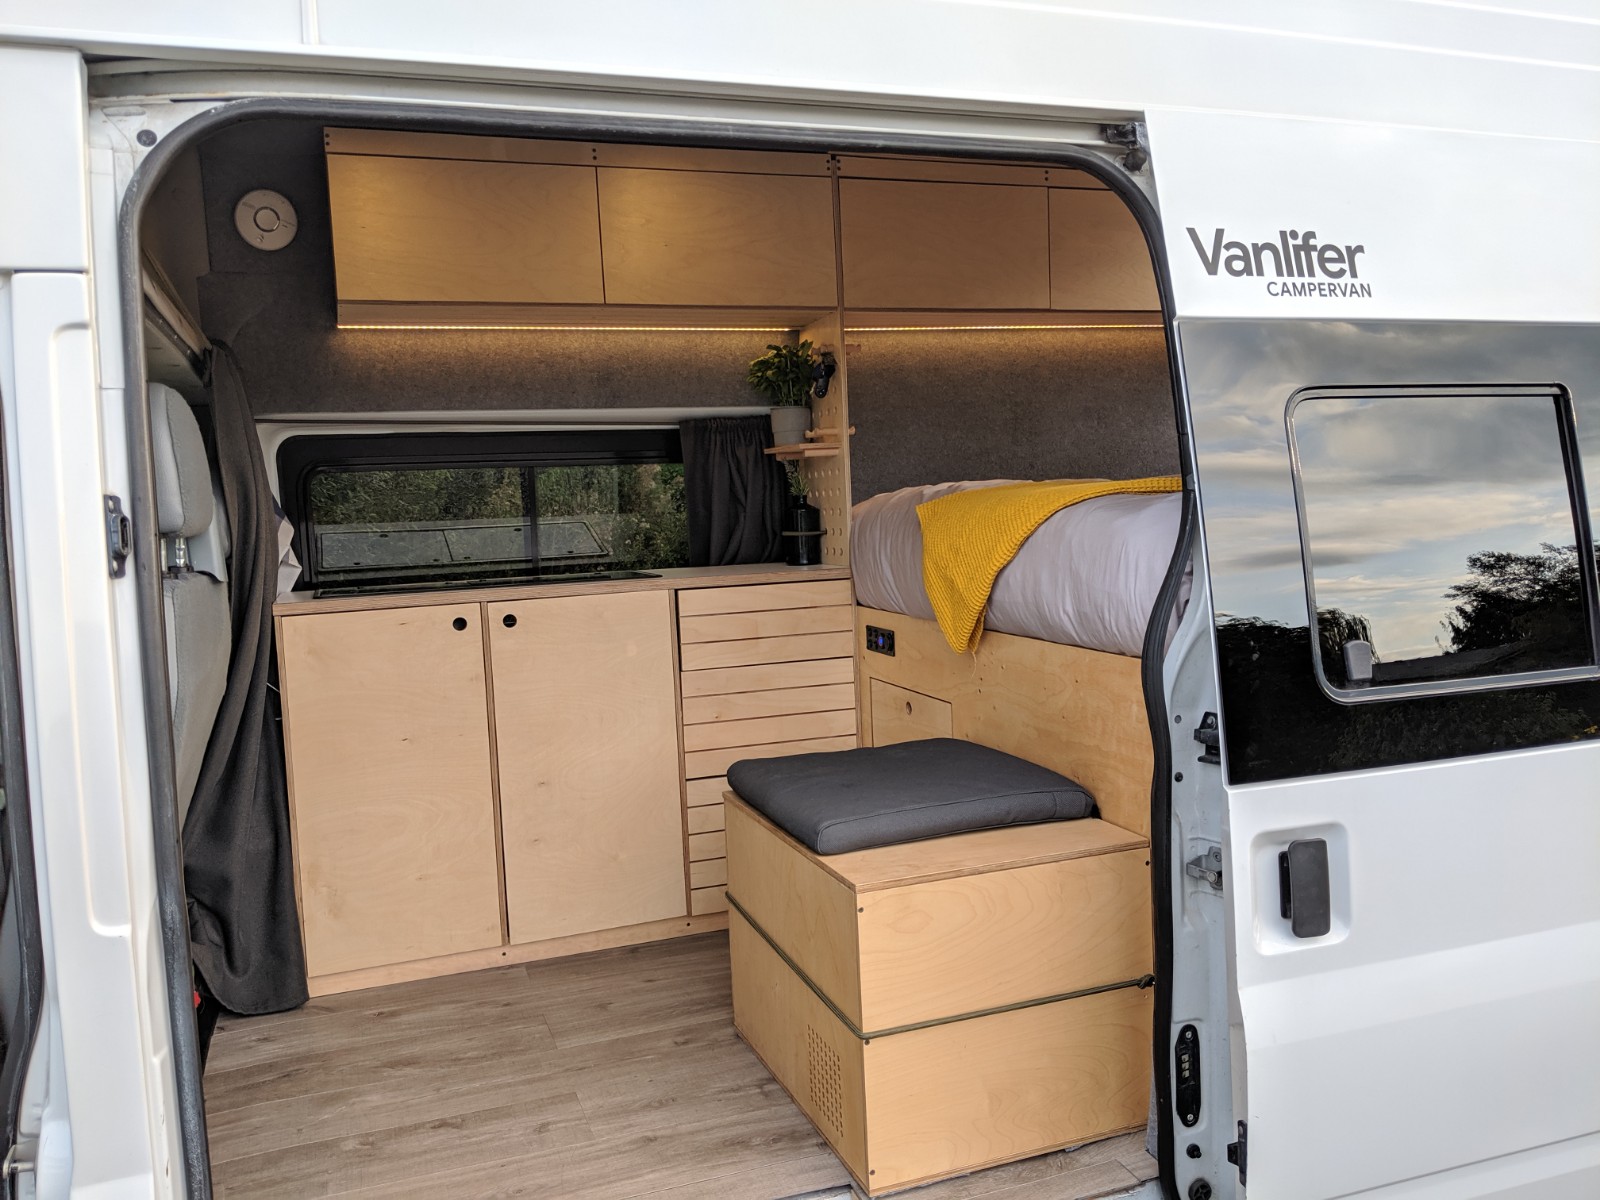 Vanlifer - Quirky Campers Zealand